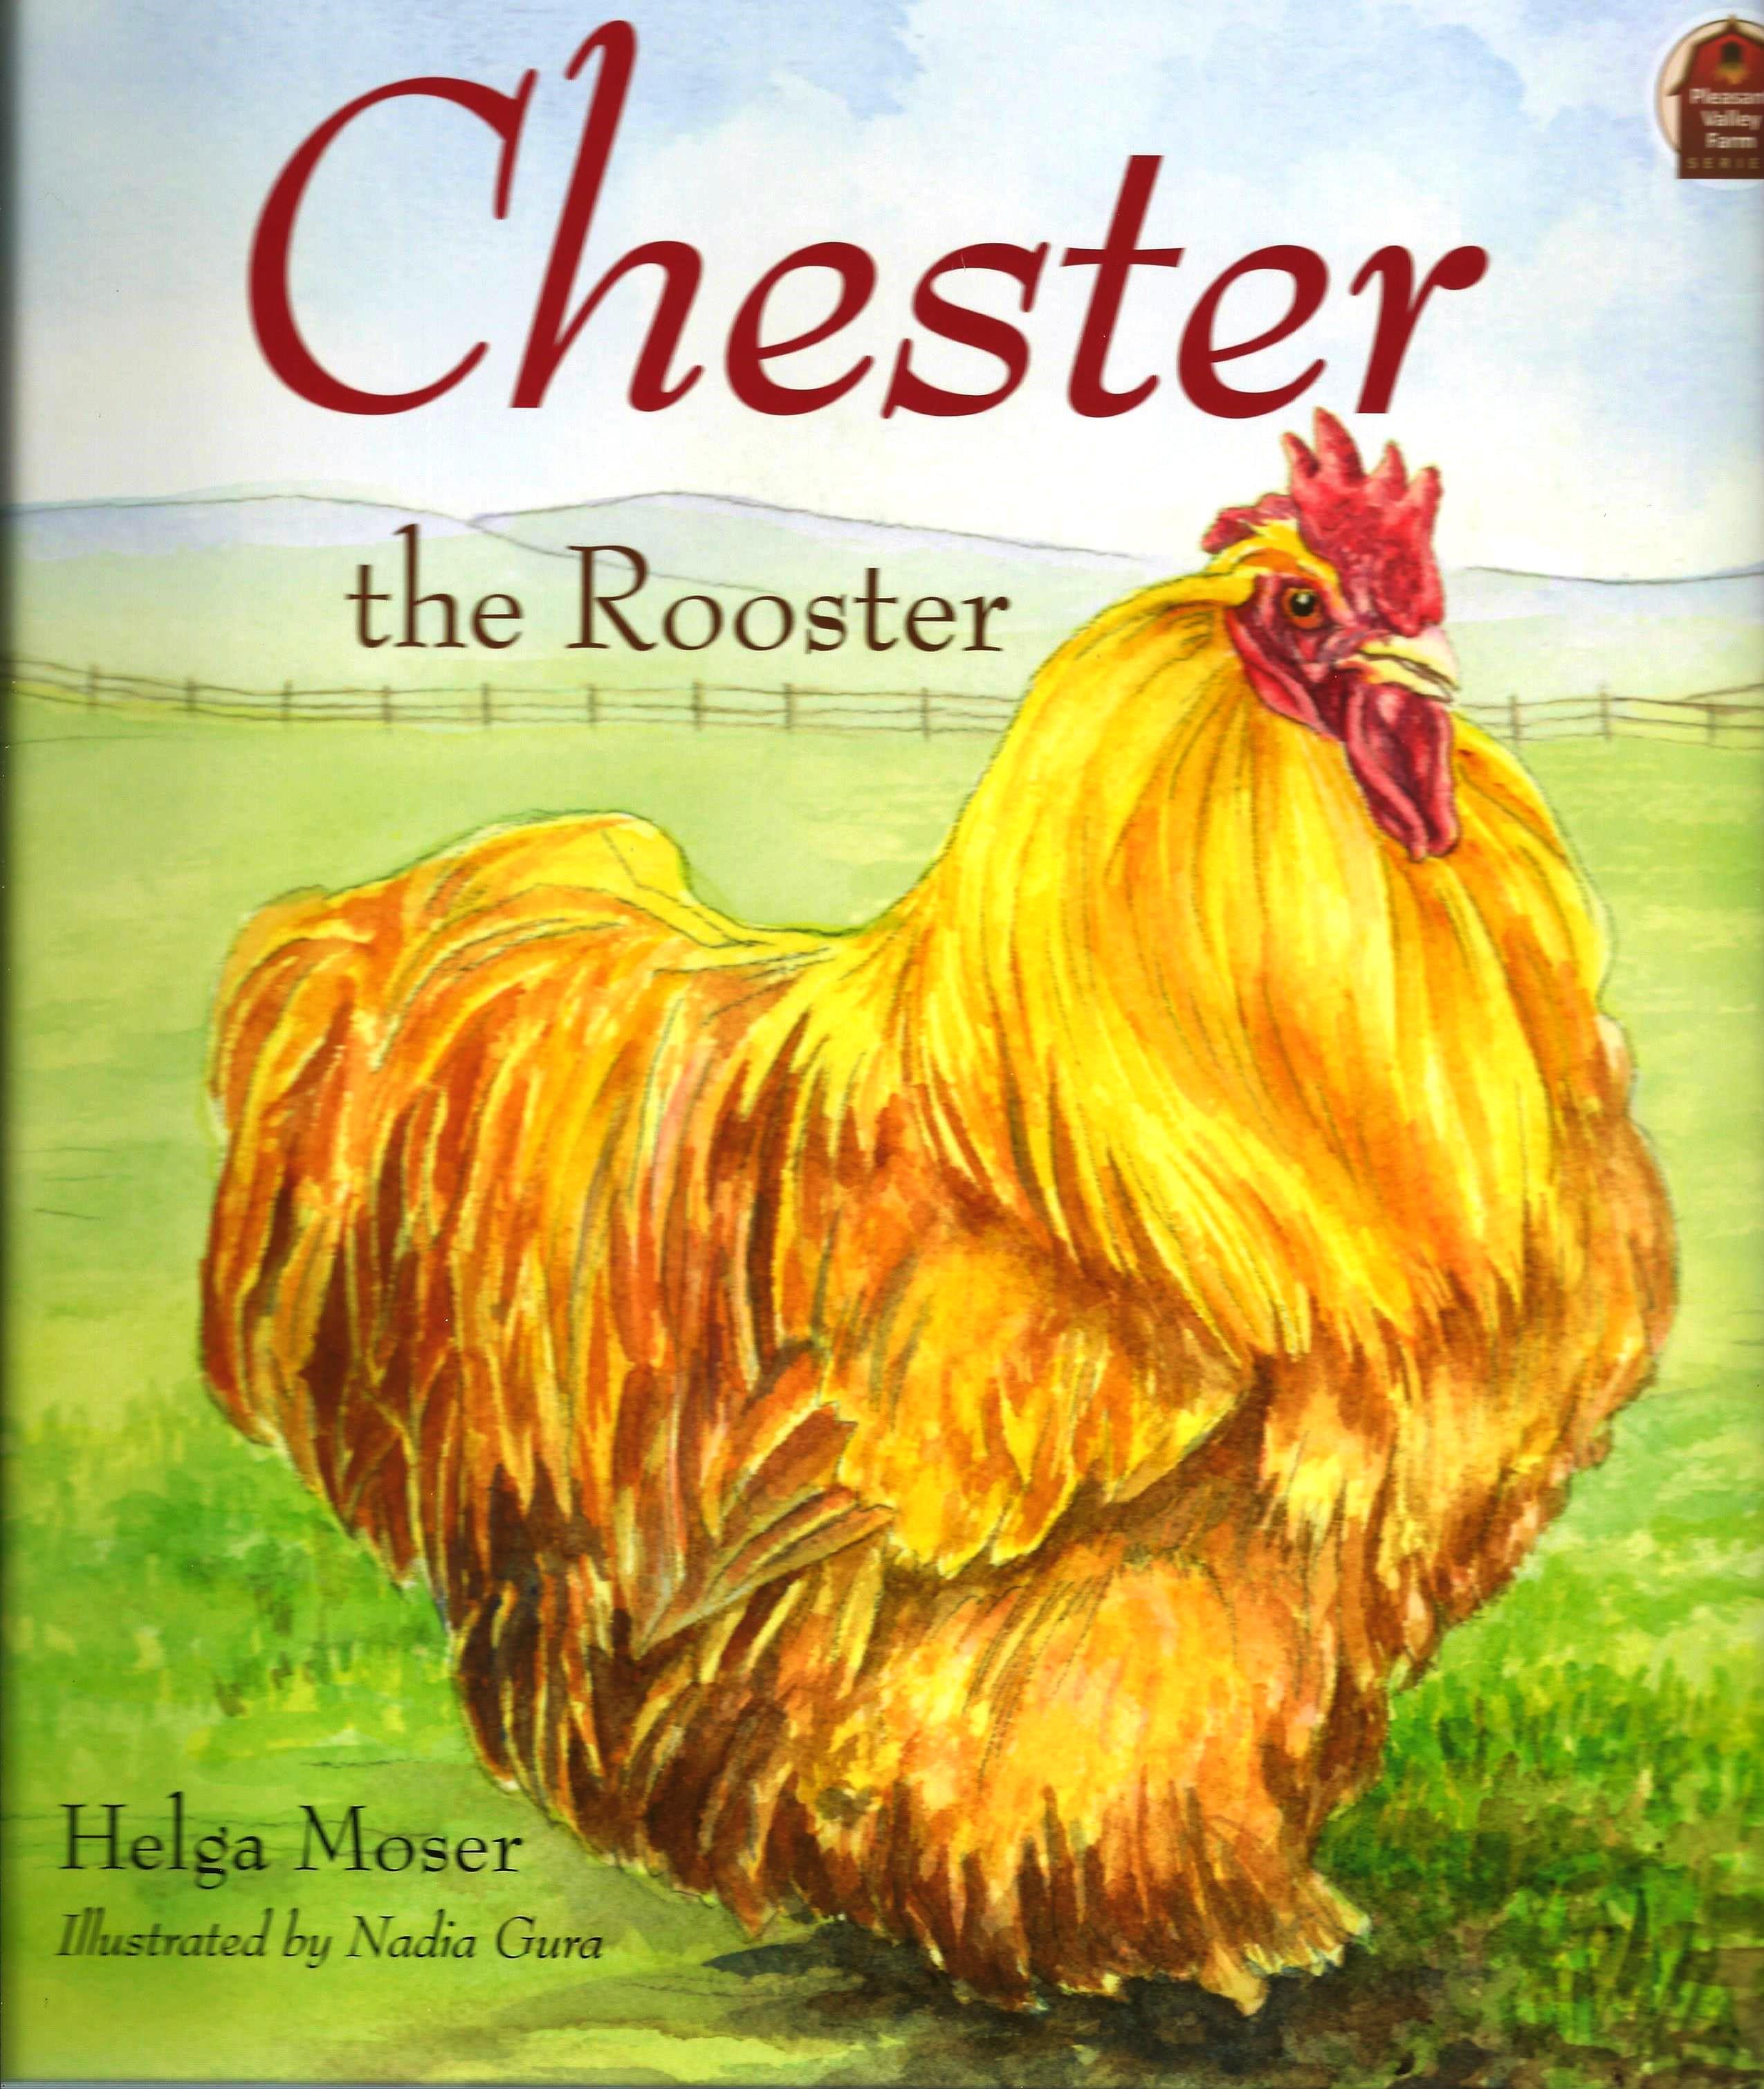 CHESTER THE ROOSTER Helga Moser